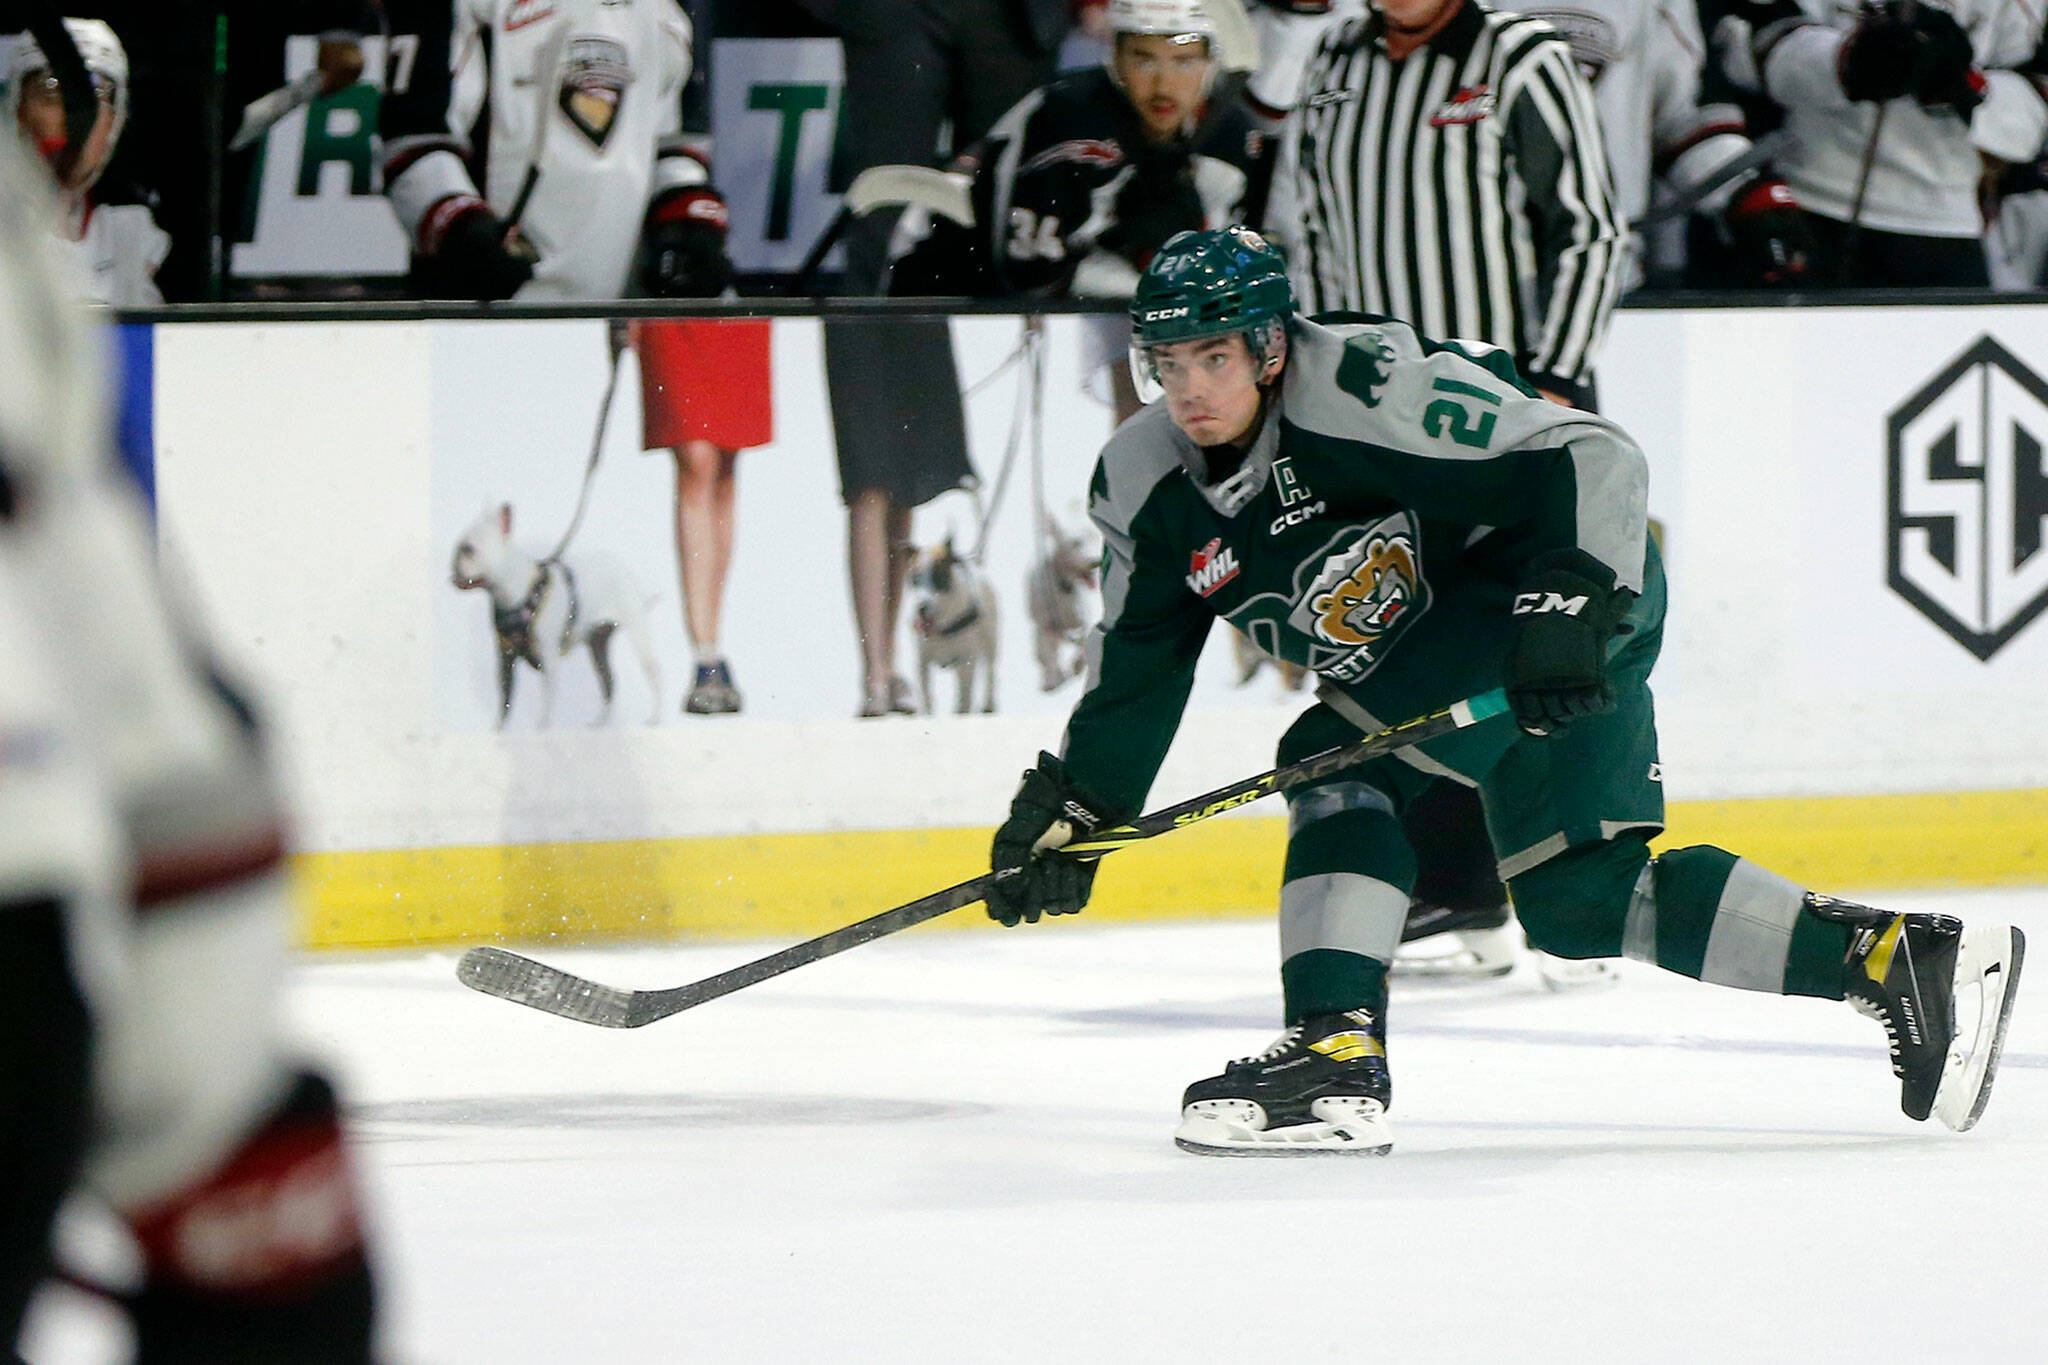 The Silvertips’ Dylan Anderson sends the puck behind the net during the season opener against the Giants on Sep. 24, 2022, at Angel of the Winds Arena in Everett. (Ryan Berry / The Herald)